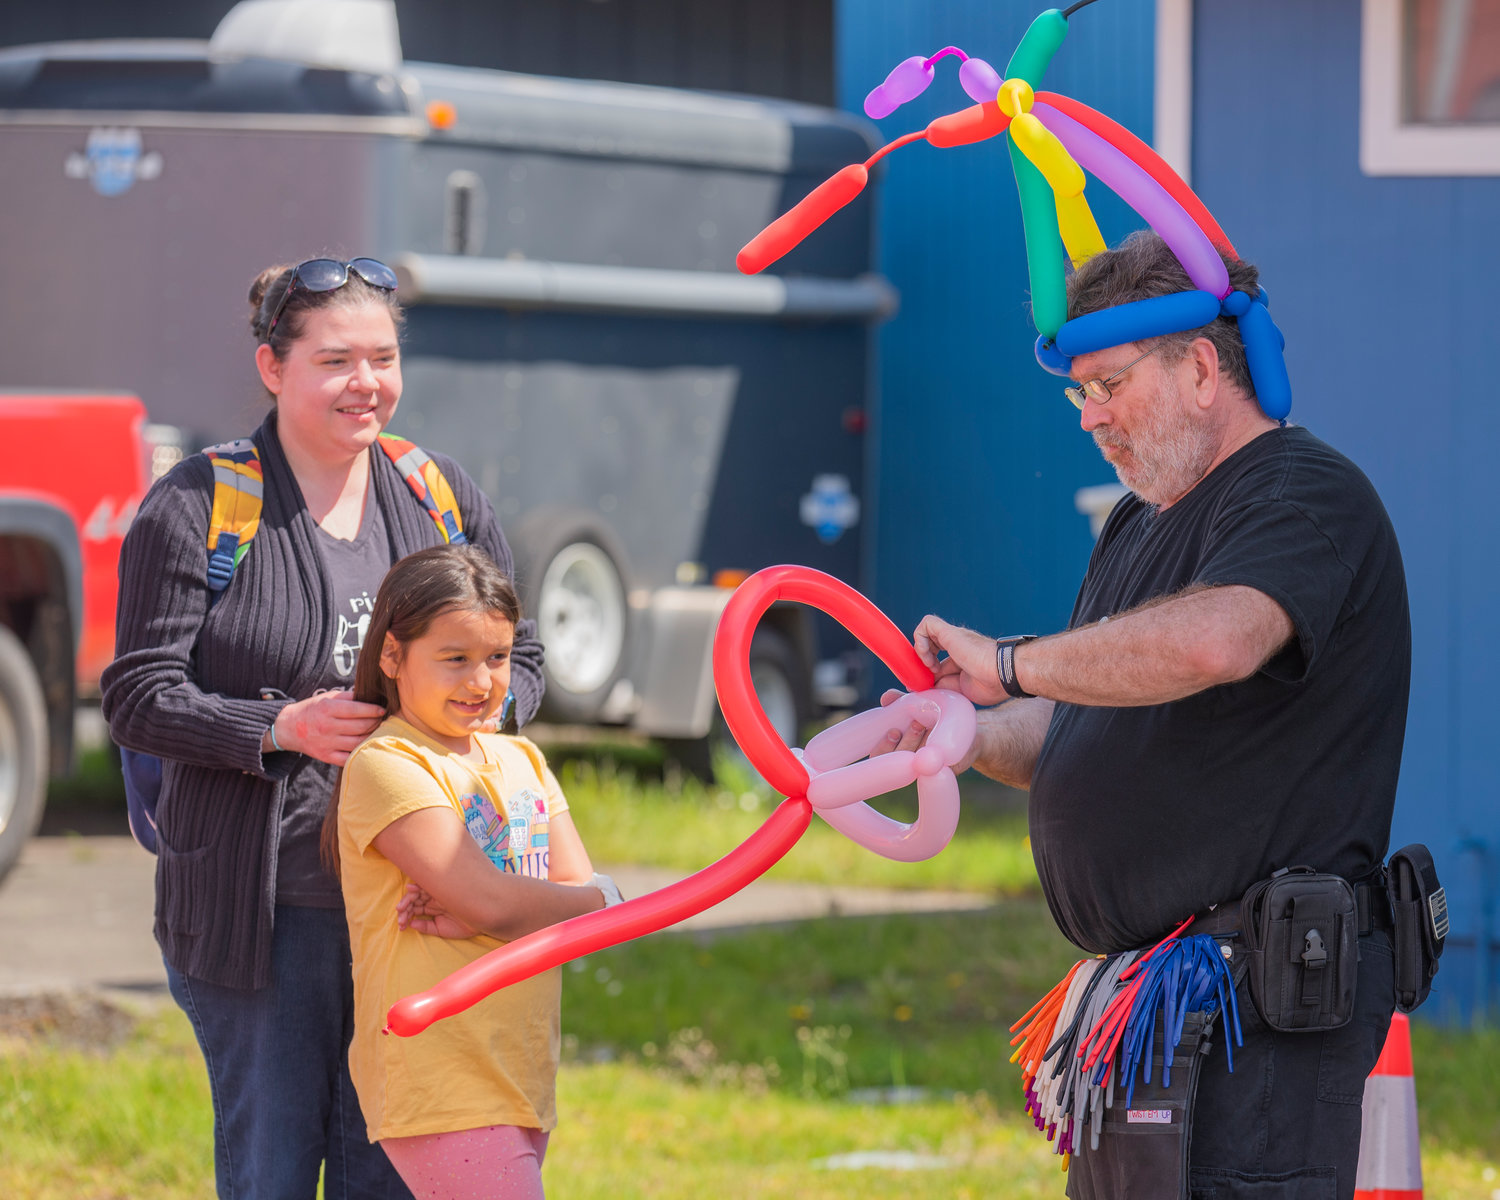 Balloon hats are bent into shape for visitors at the Spring Youth Fair in Centralia on Sunday.